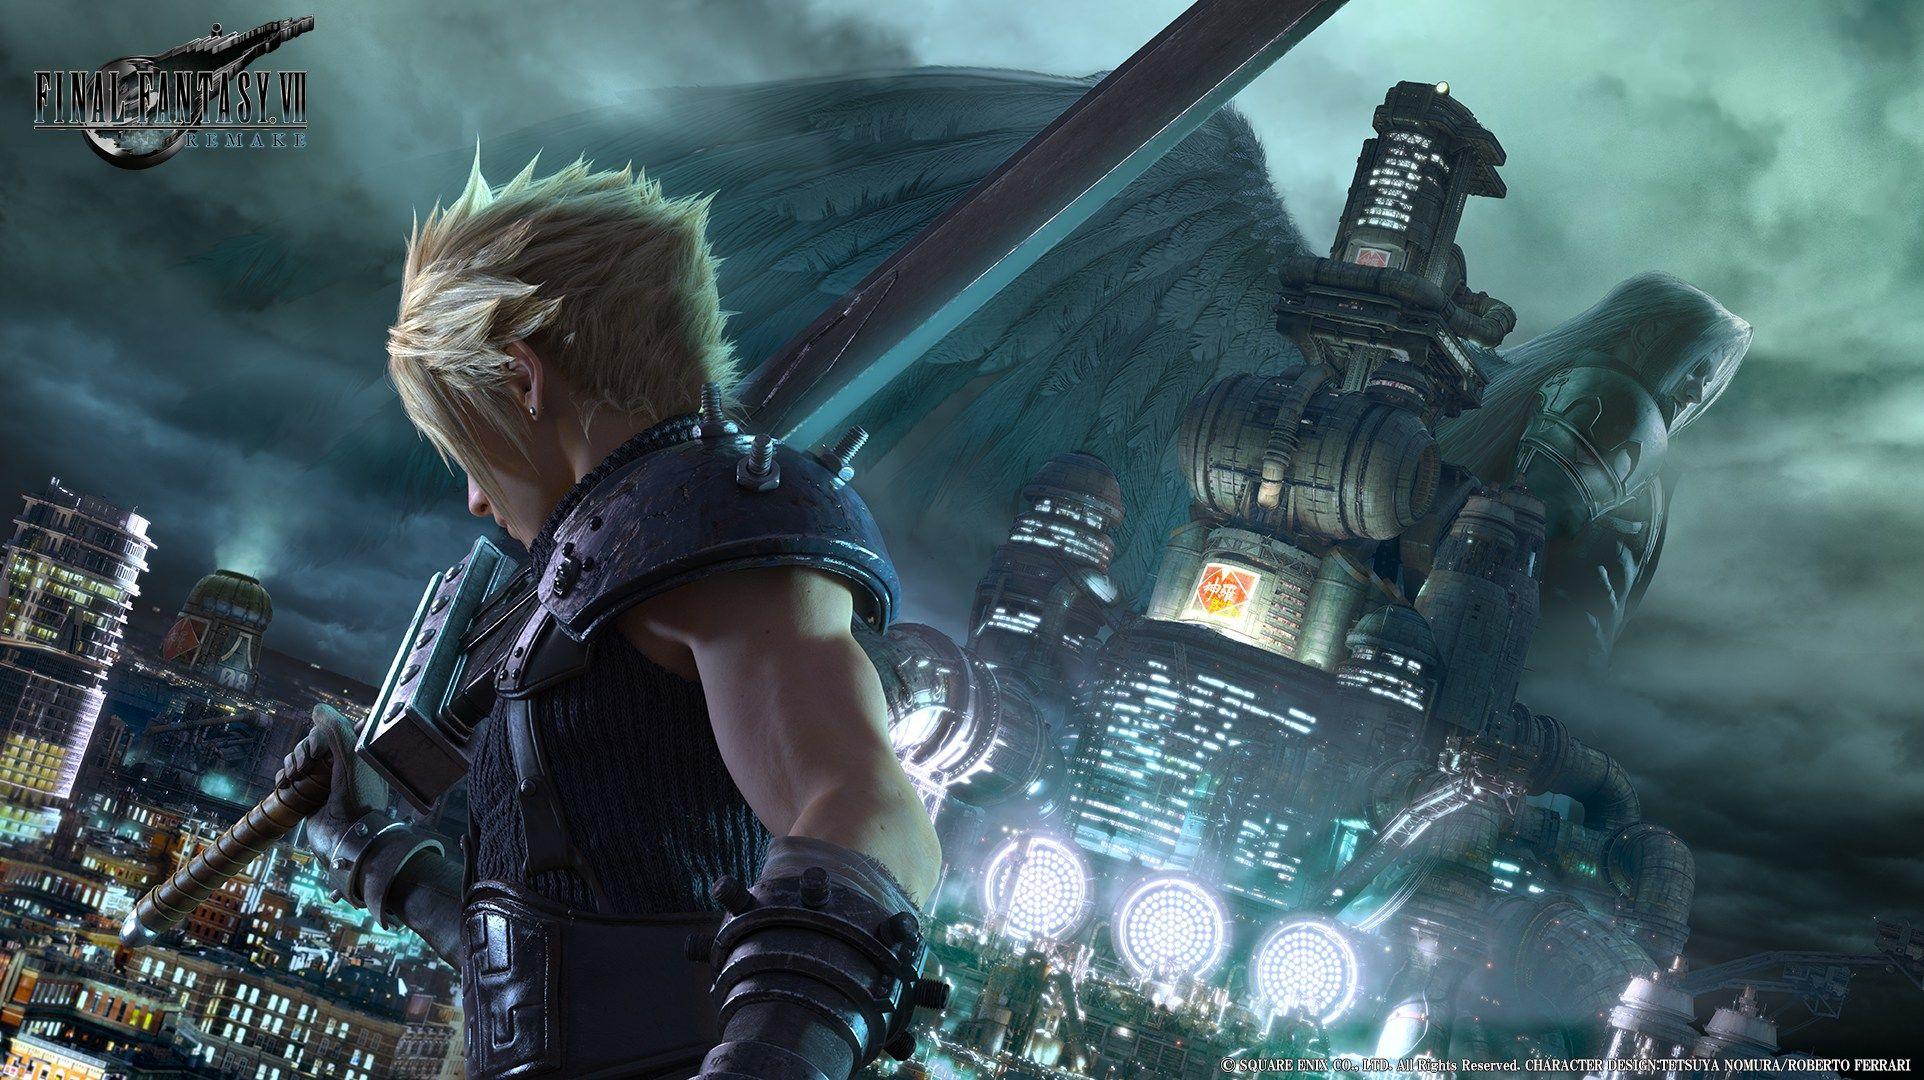 Final Fantasy VII Remake Gets A New Key Visual Showing Cloud